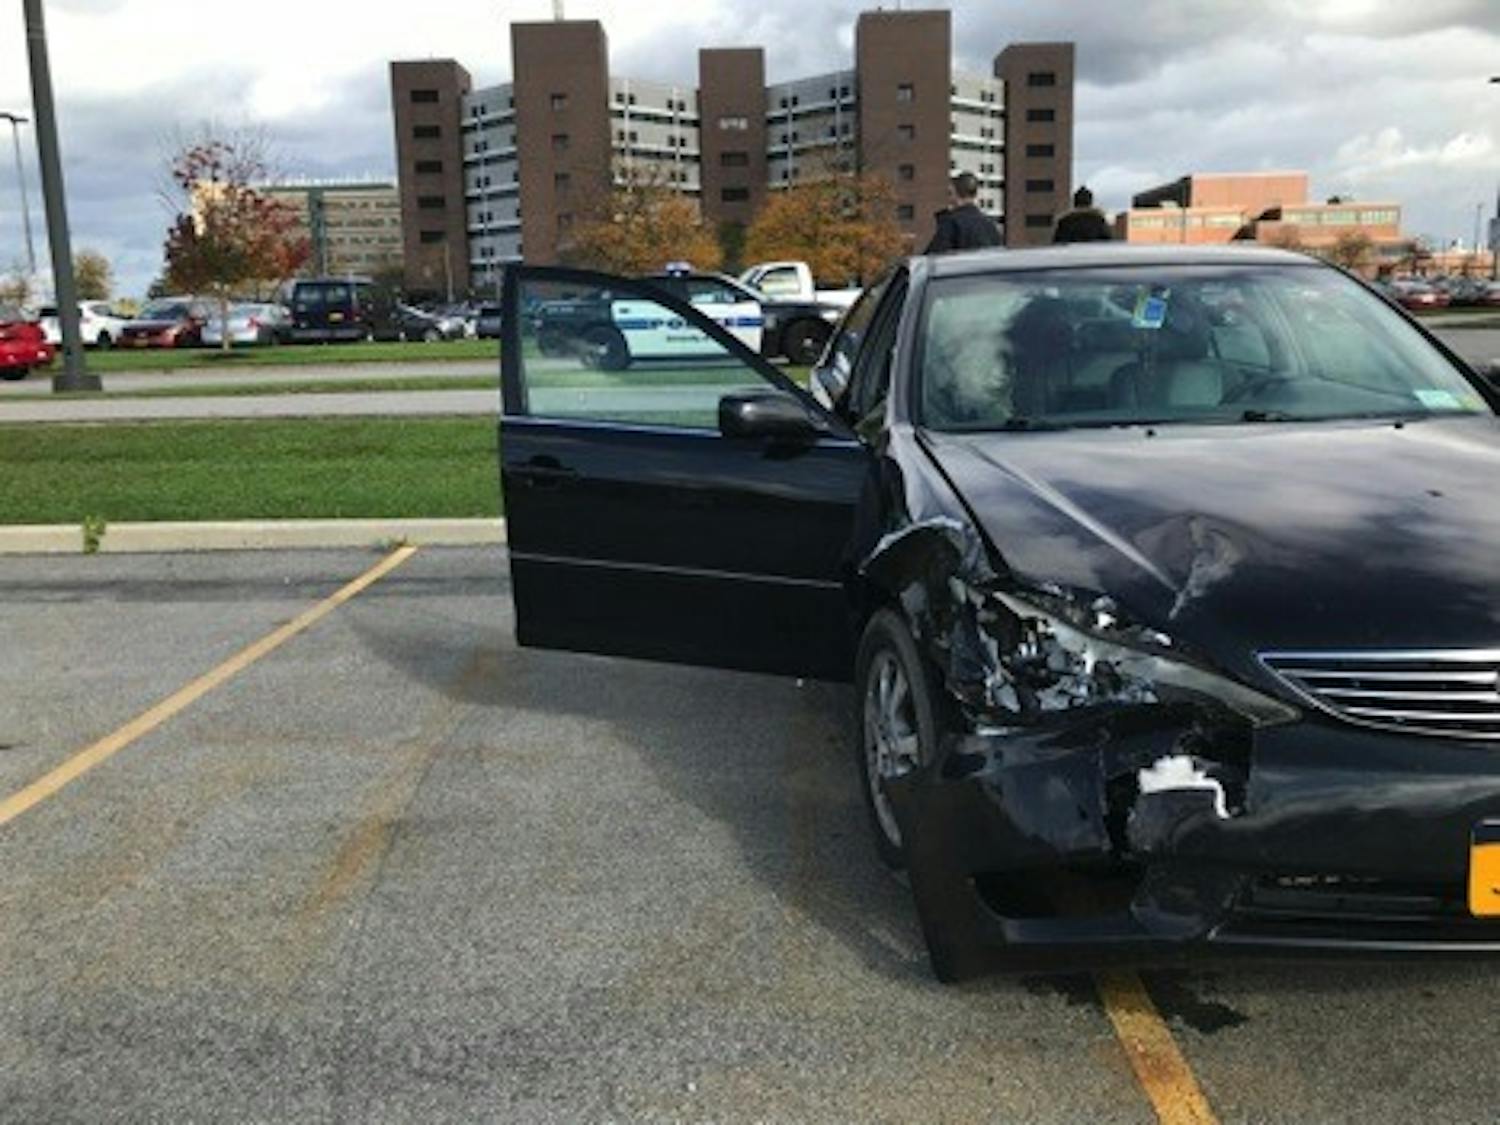 Two UB student got into a car accident outside the Hochstetter B parking lot on Augspurger Road. Neither student were seriously injured, but one car had to be towed.&nbsp;